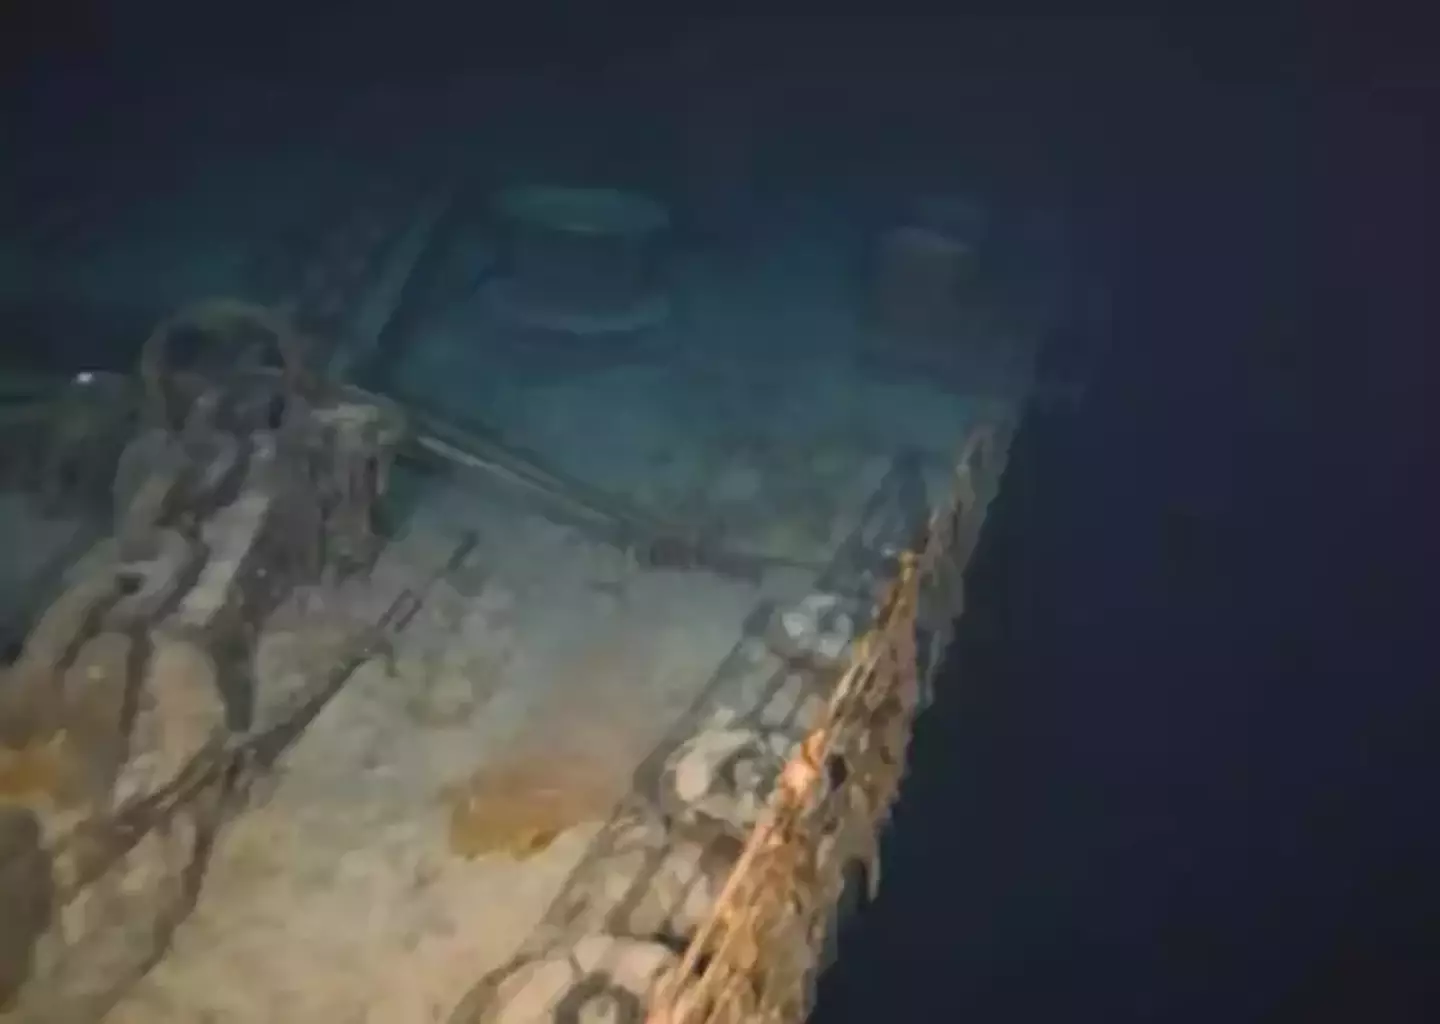 The sub was used to explore the remains of the Titanic.